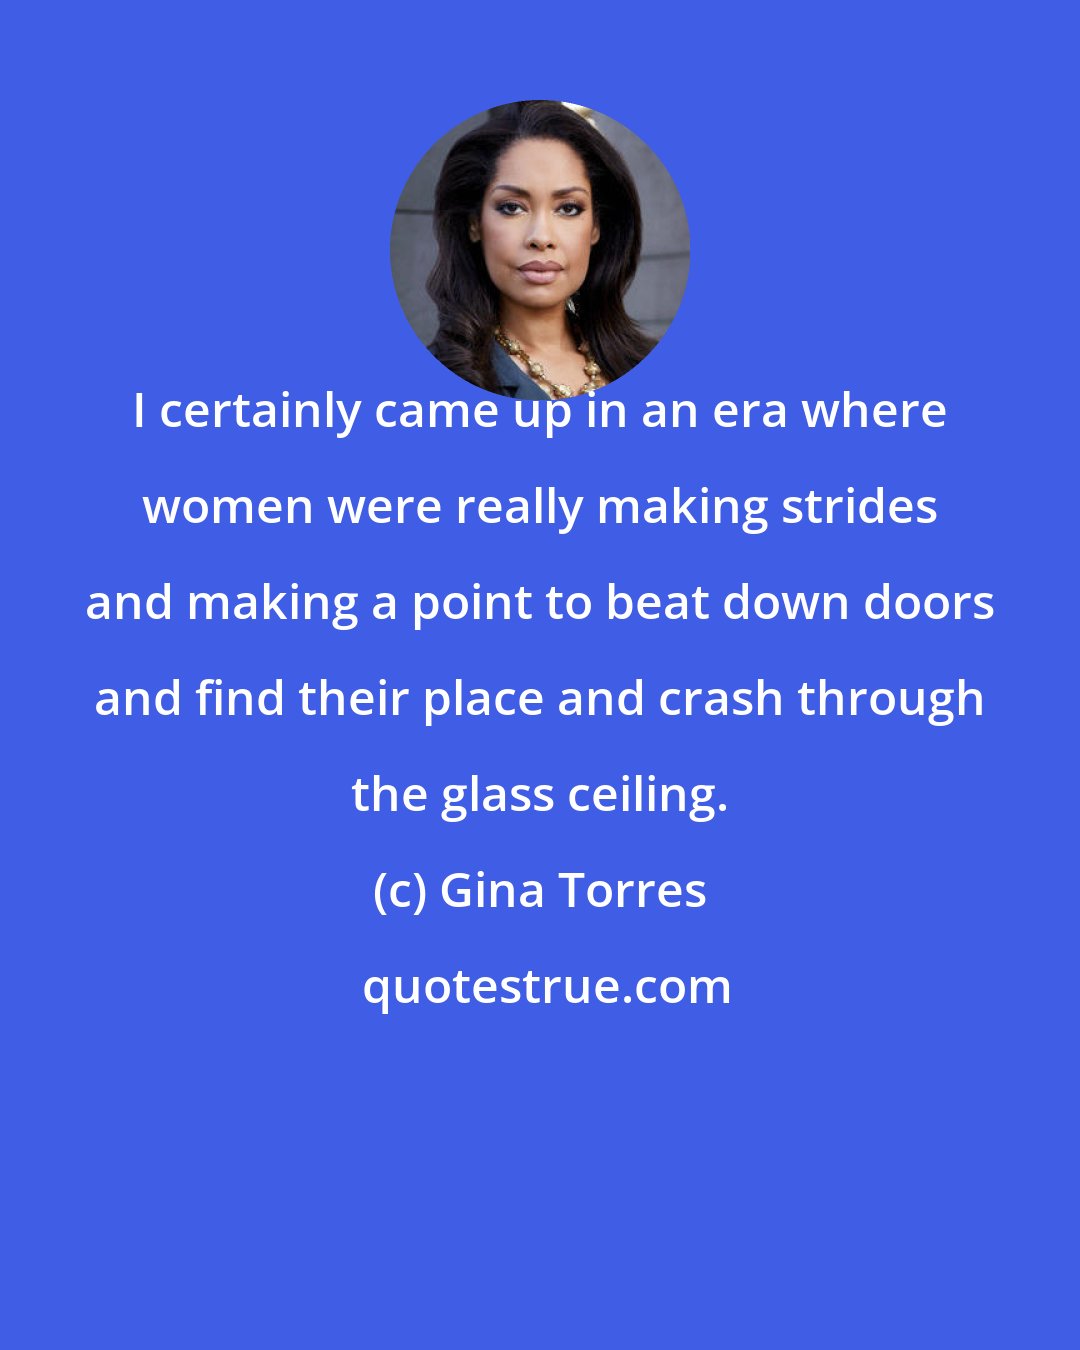 Gina Torres: I certainly came up in an era where women were really making strides and making a point to beat down doors and find their place and crash through the glass ceiling.